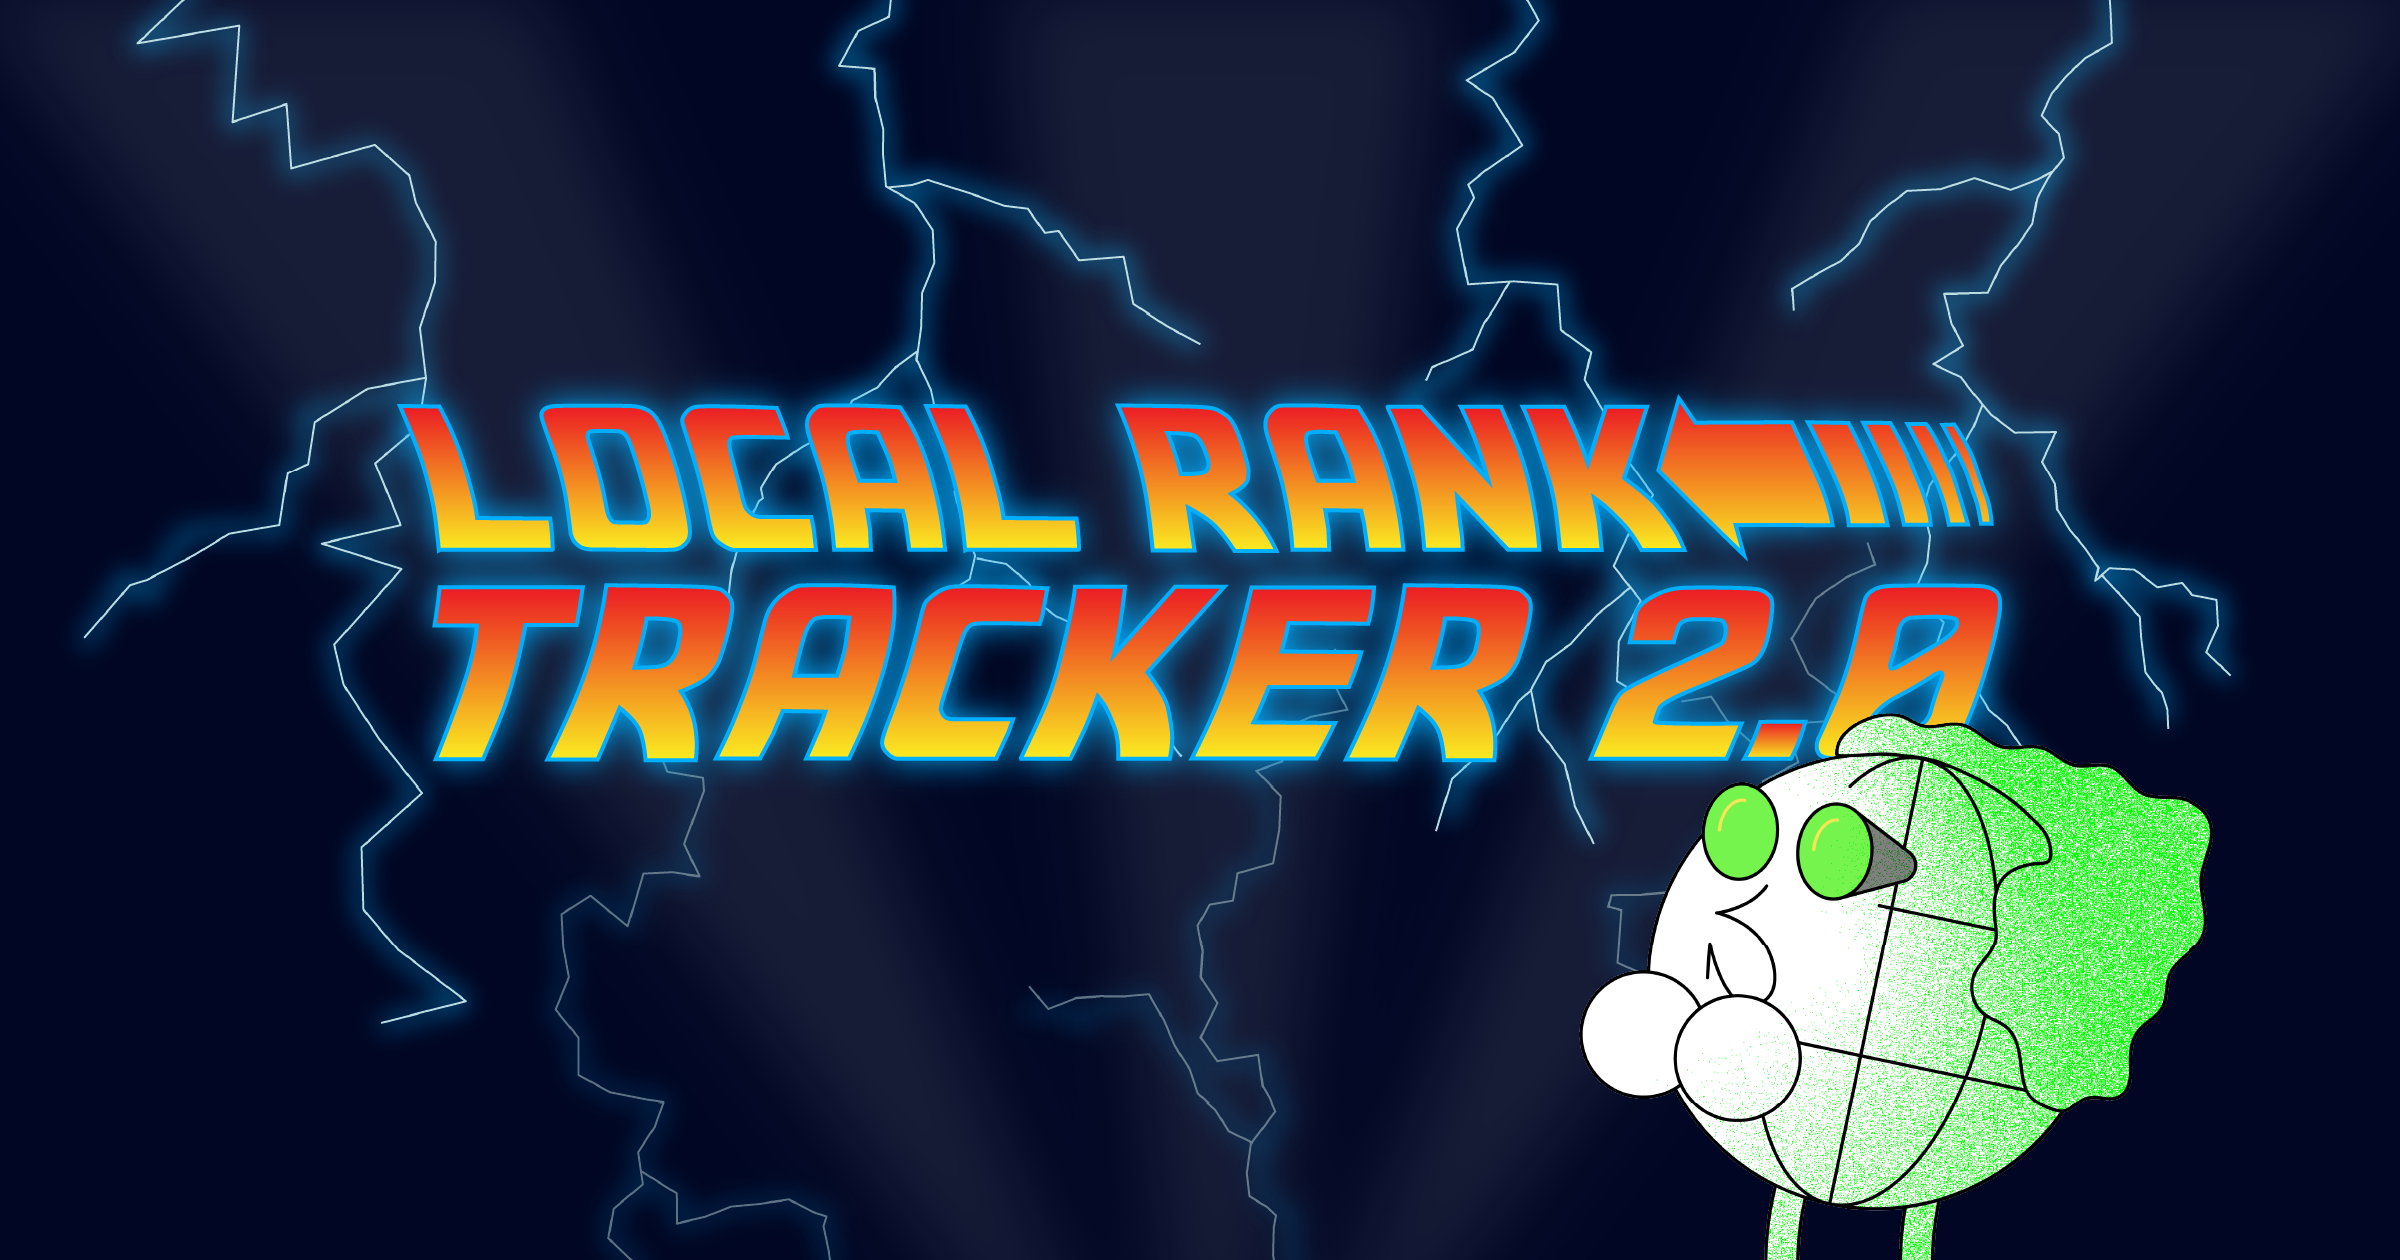 Local Rank Tracker 2.0 is here!